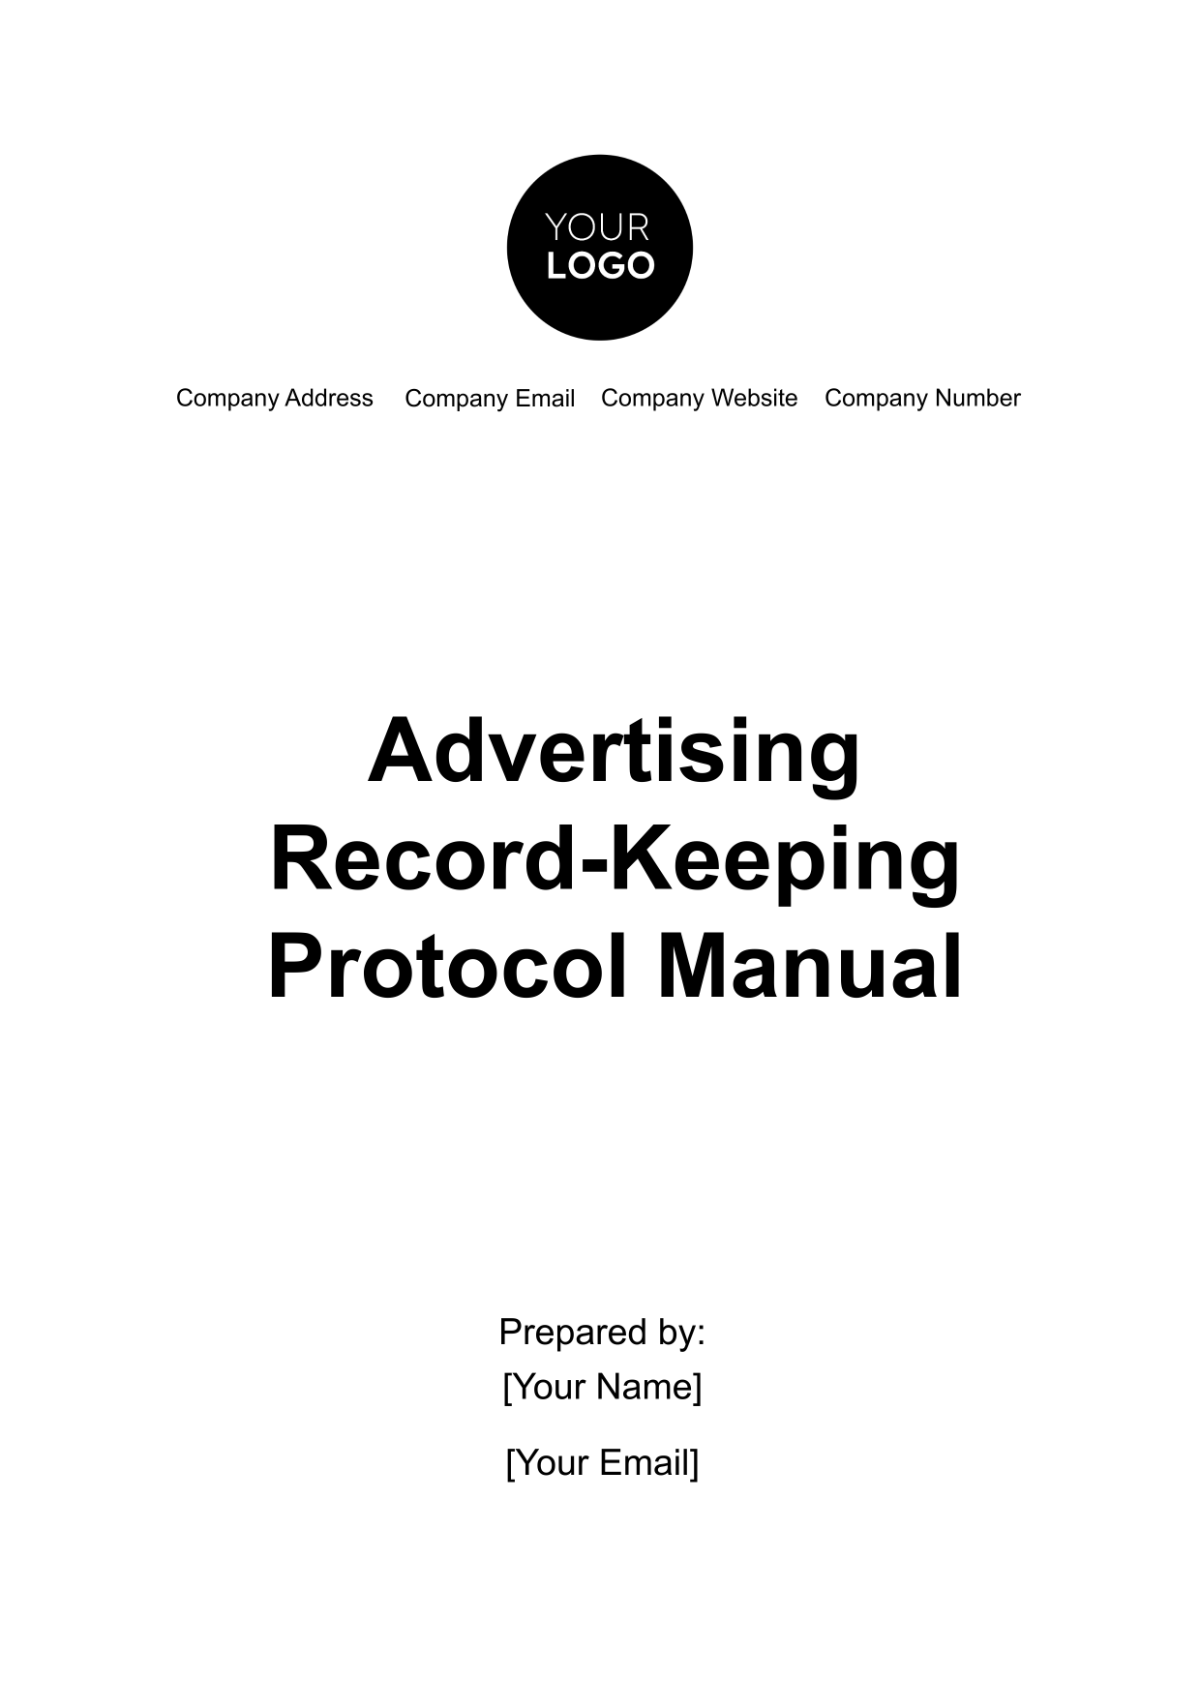 Free Advertising Record-Keeping Protocol Manual Template